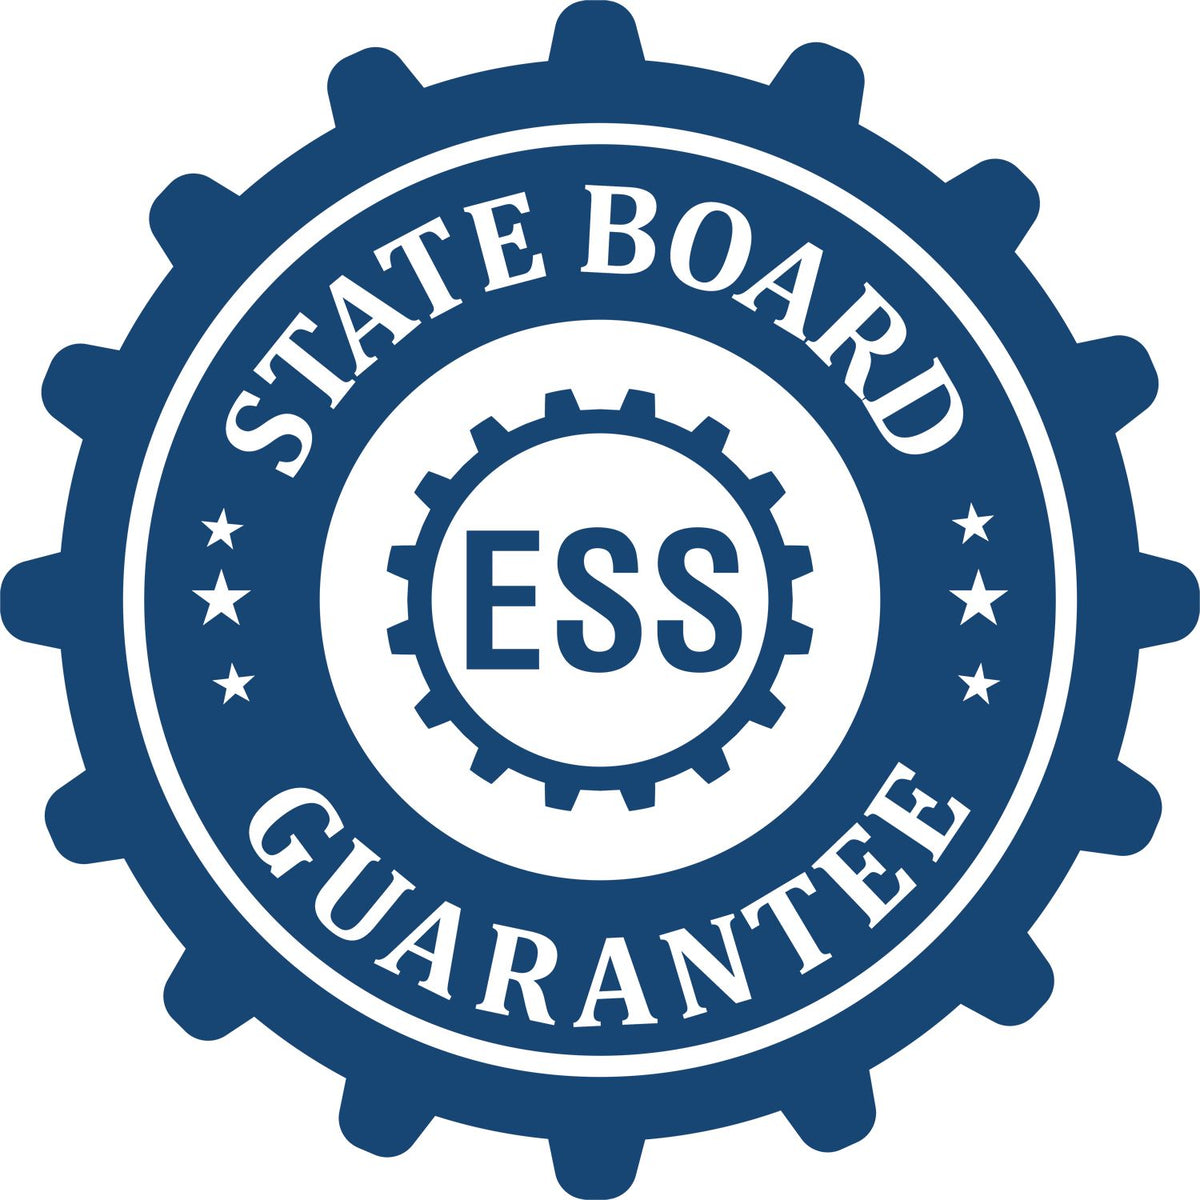 An emblem in a gear shape illustrating a state board guarantee for the Premium MaxLight Pre-Inked Georgia Engineering Stamp product.